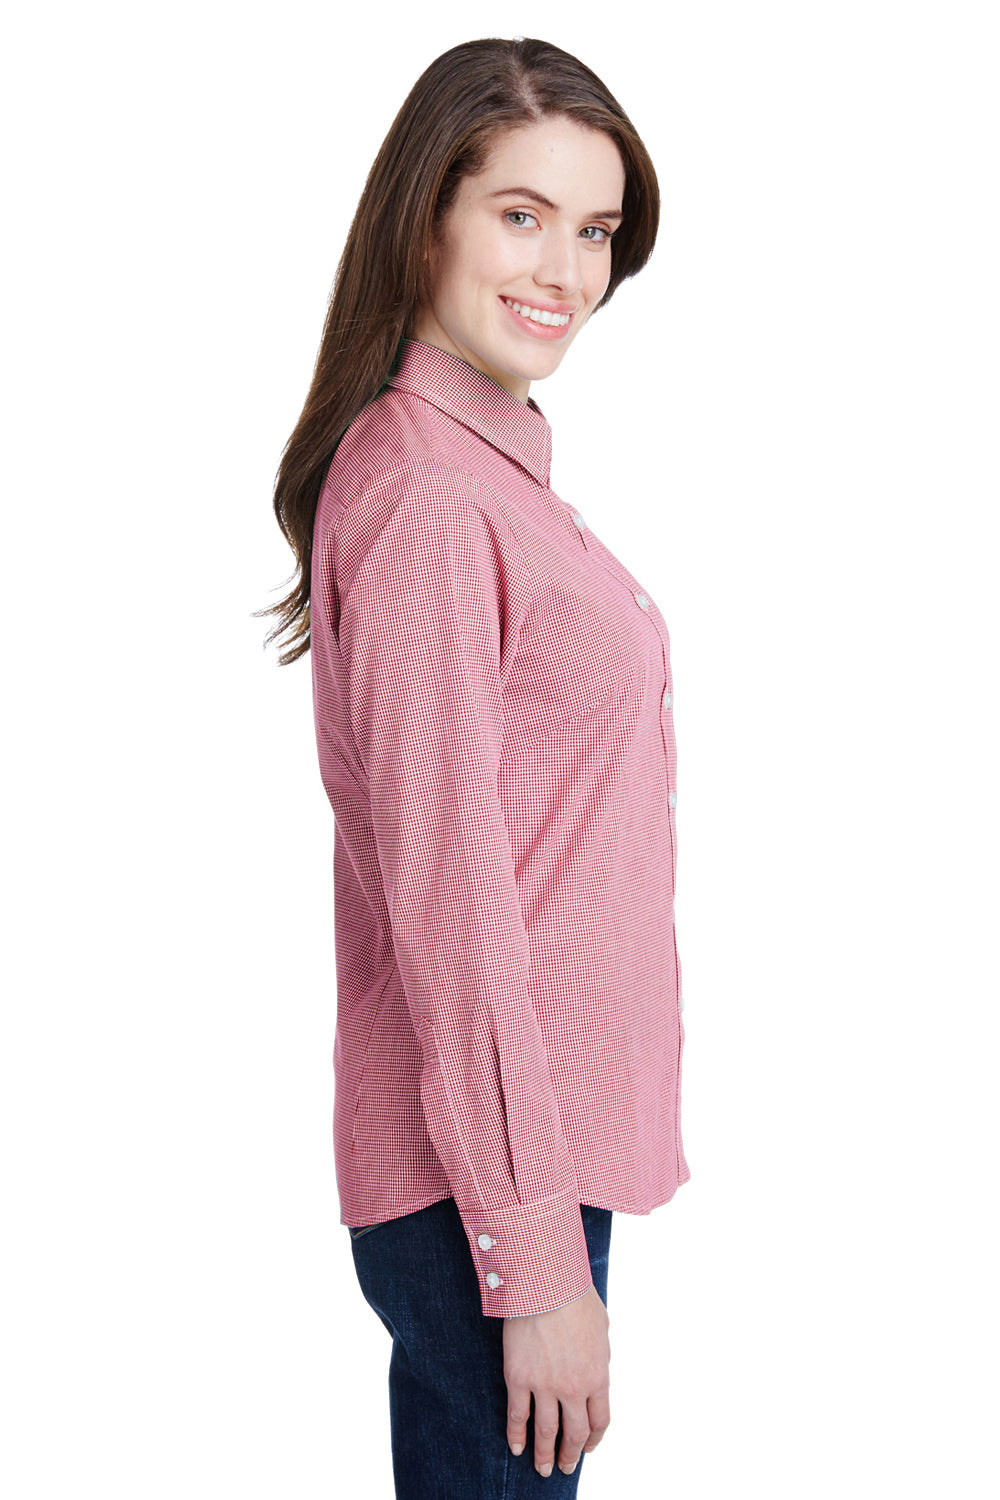 Artisan Collection RP320 Womens Microcheck Gingham Long Sleeve Button Down Shirt Red/White Model Side